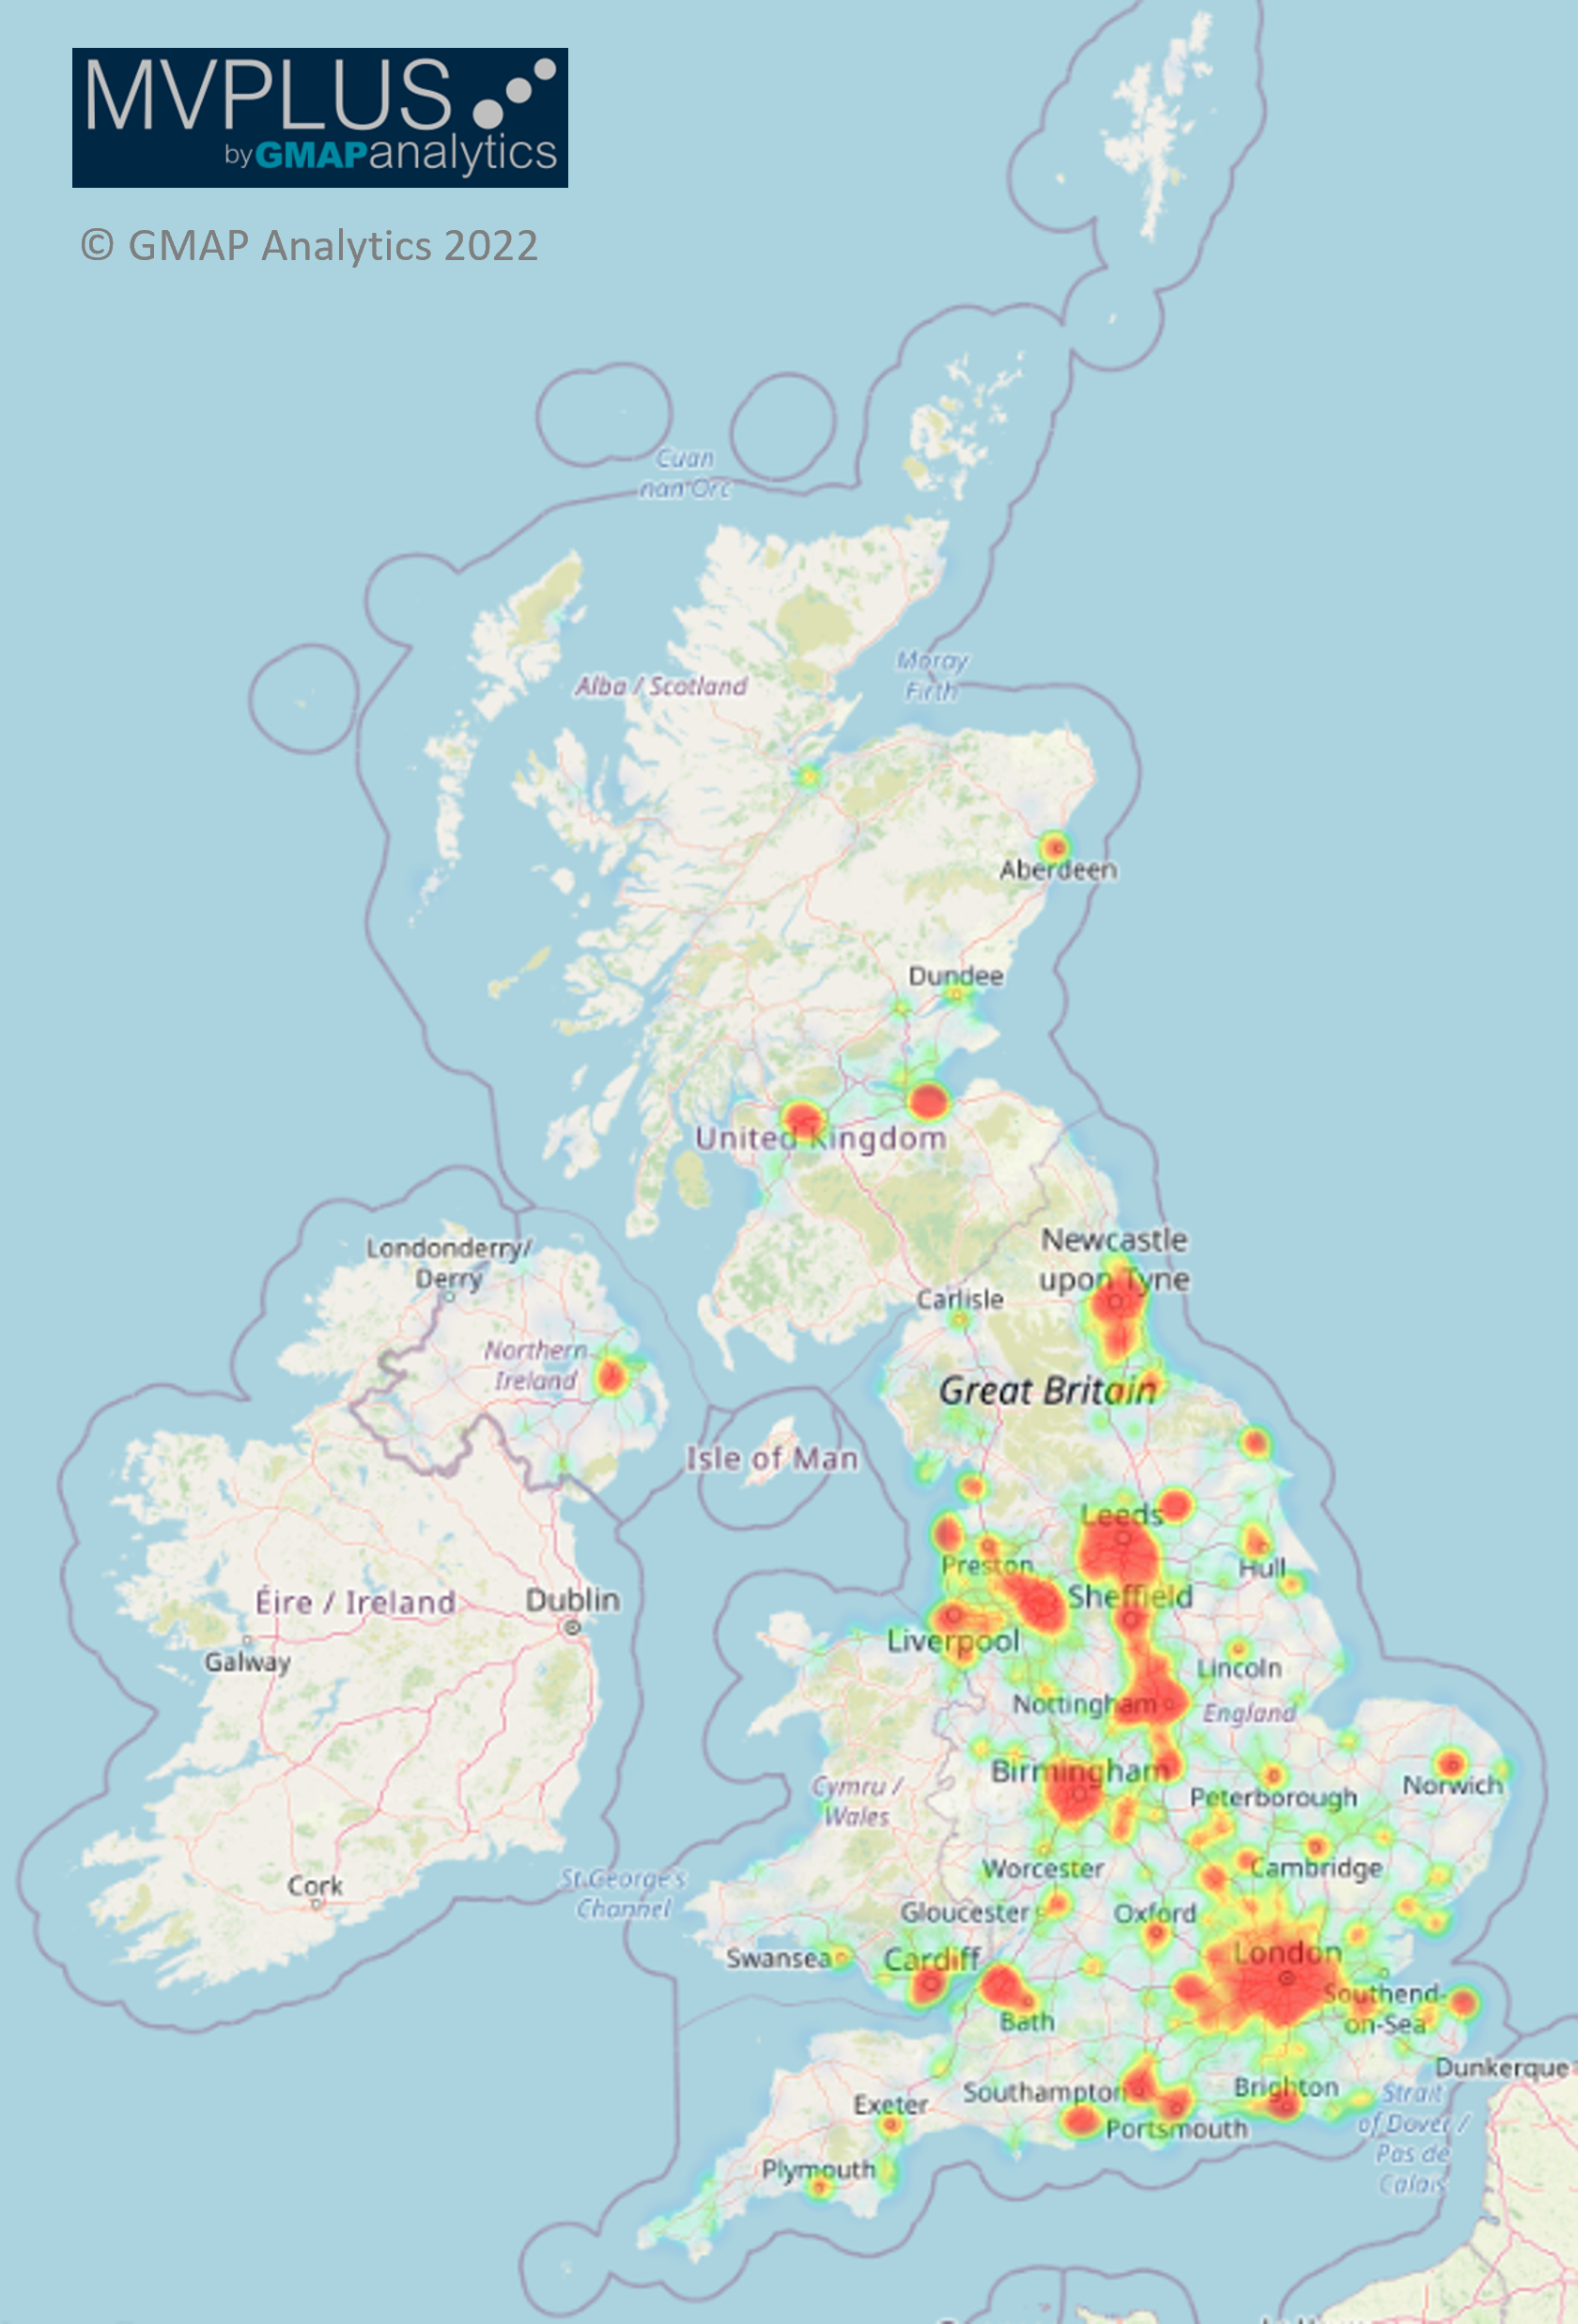 Location data and map of the hotspots of the Pizza venues in the UK